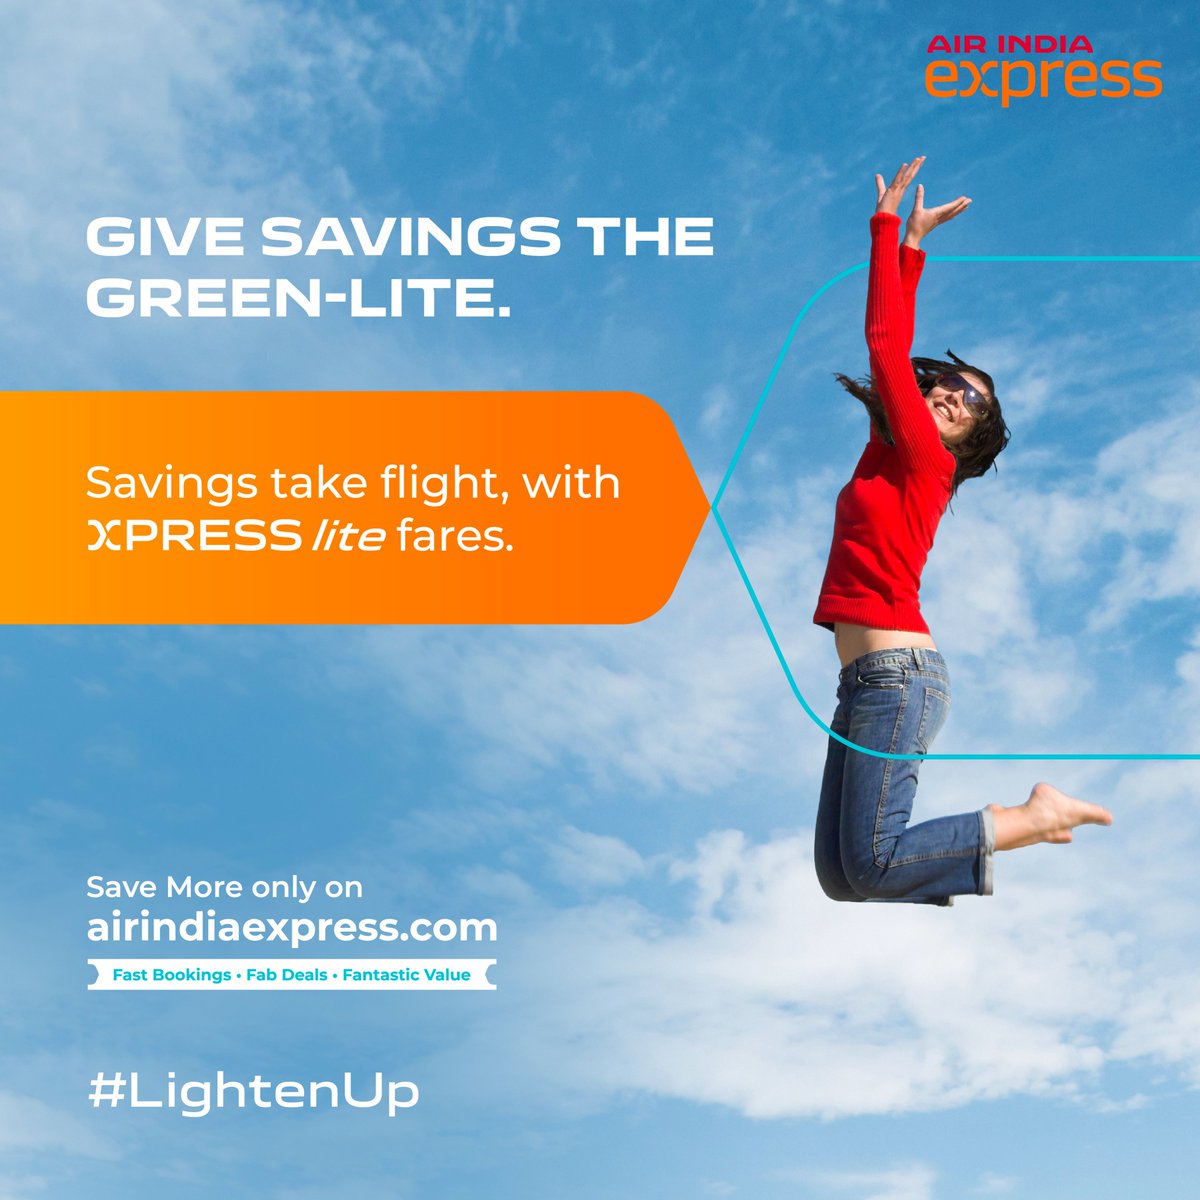 #LightenUp your wallet and your mood with our special Xpress Lite fares! Book now and save more only on airindiaexpress.com or our mobile app. #FlyAsYouAre ✈